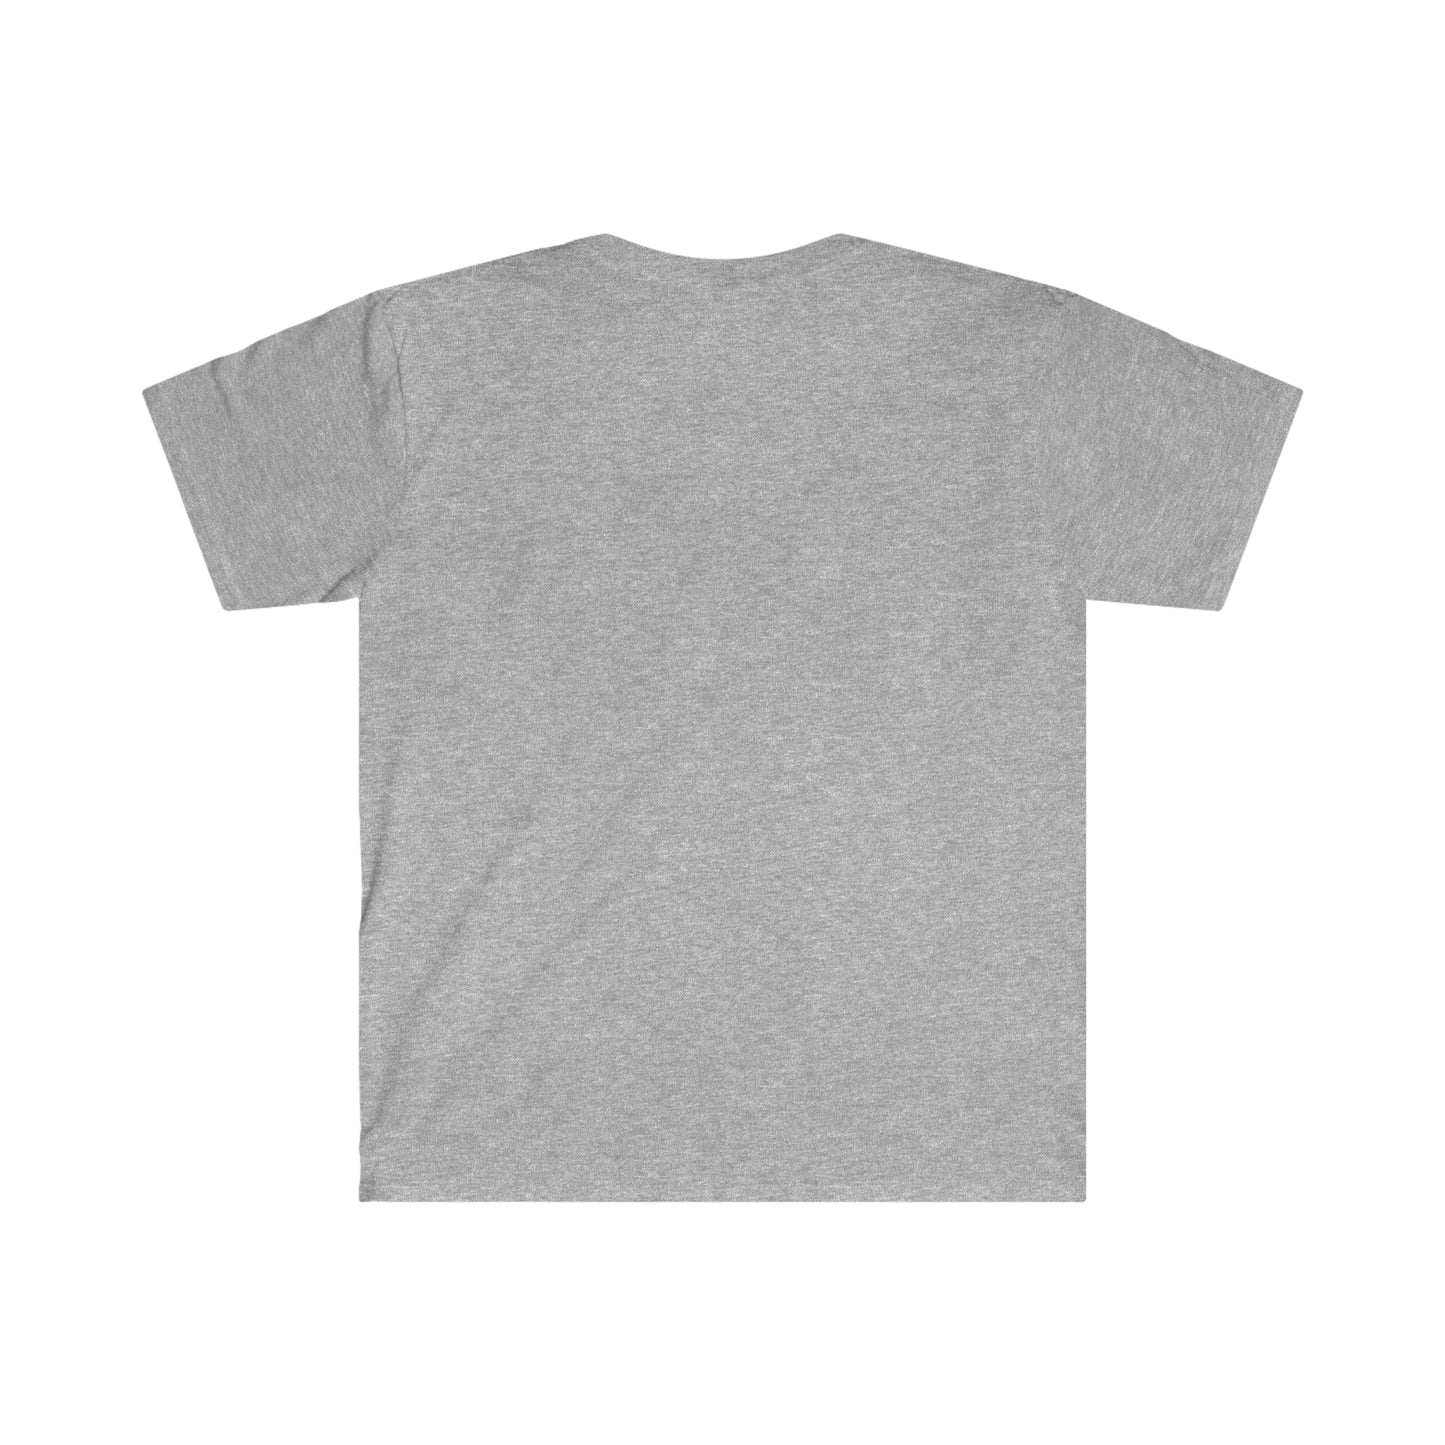 The Undecided Store Line Logo T shirt